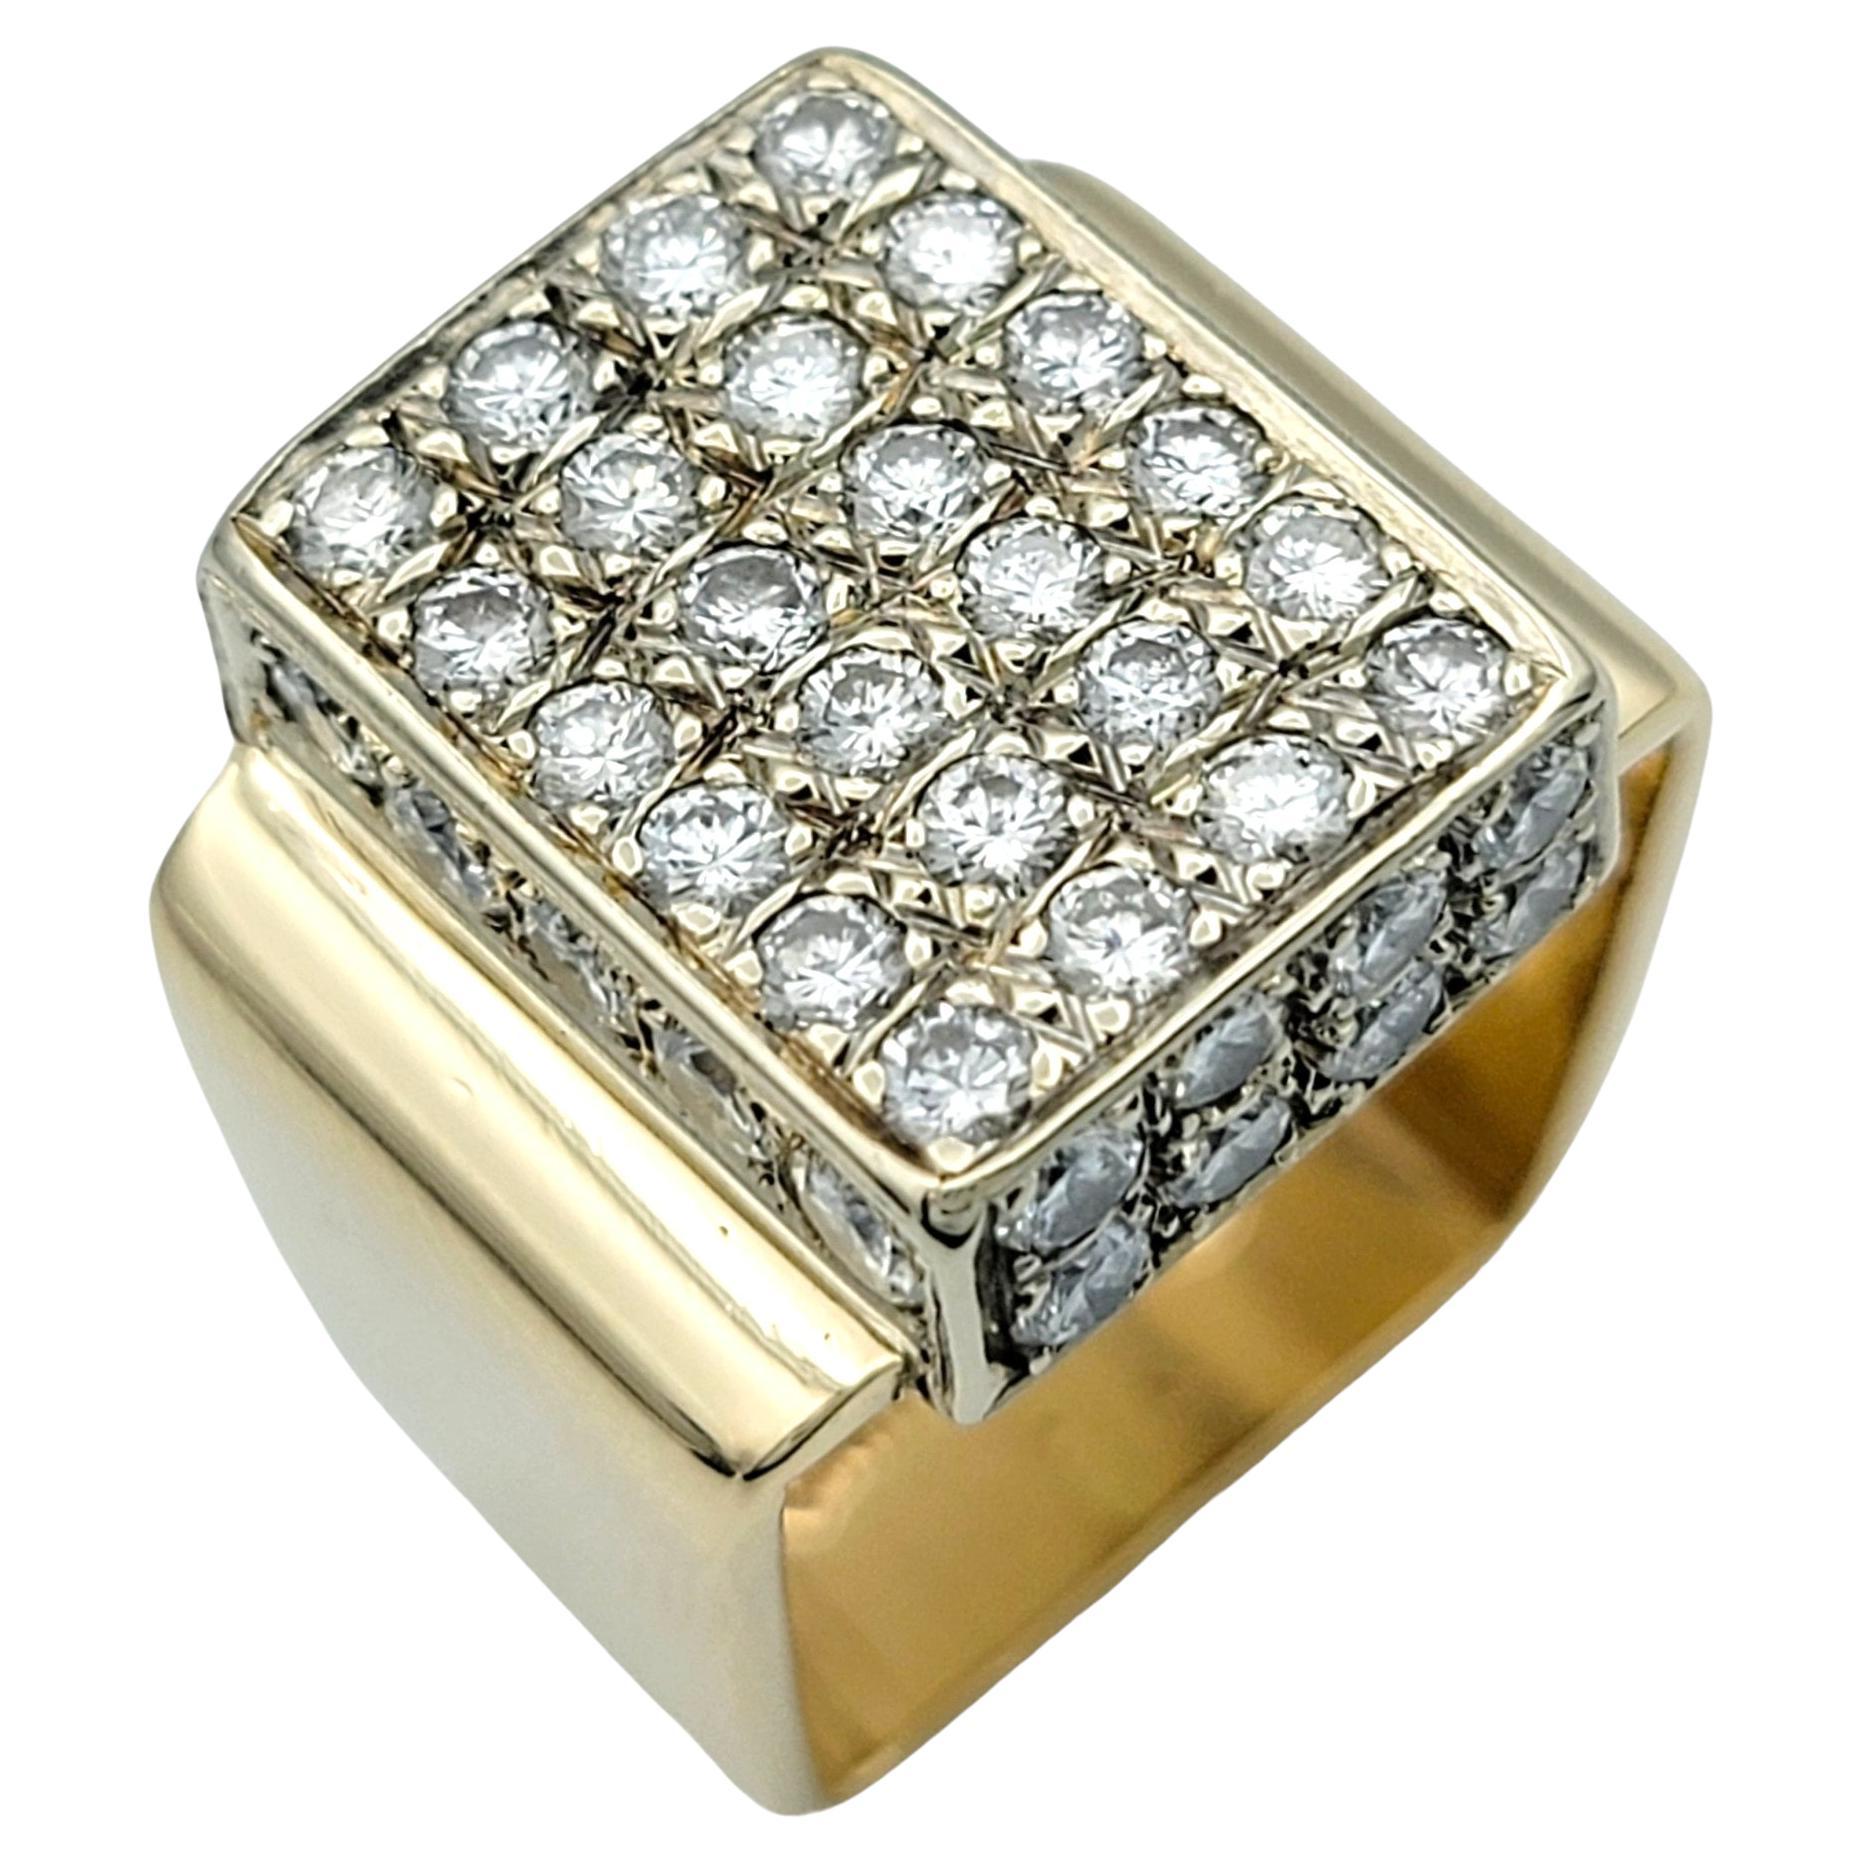 *Ring sizer measures this piece at a size 4.75, but it will comfortably fit a size 5.5 due to its squared shape. 

This diamond geometric cluster ring is a stunning piece set in 14 karat yellow gold, featuring a band with a unique squared design.